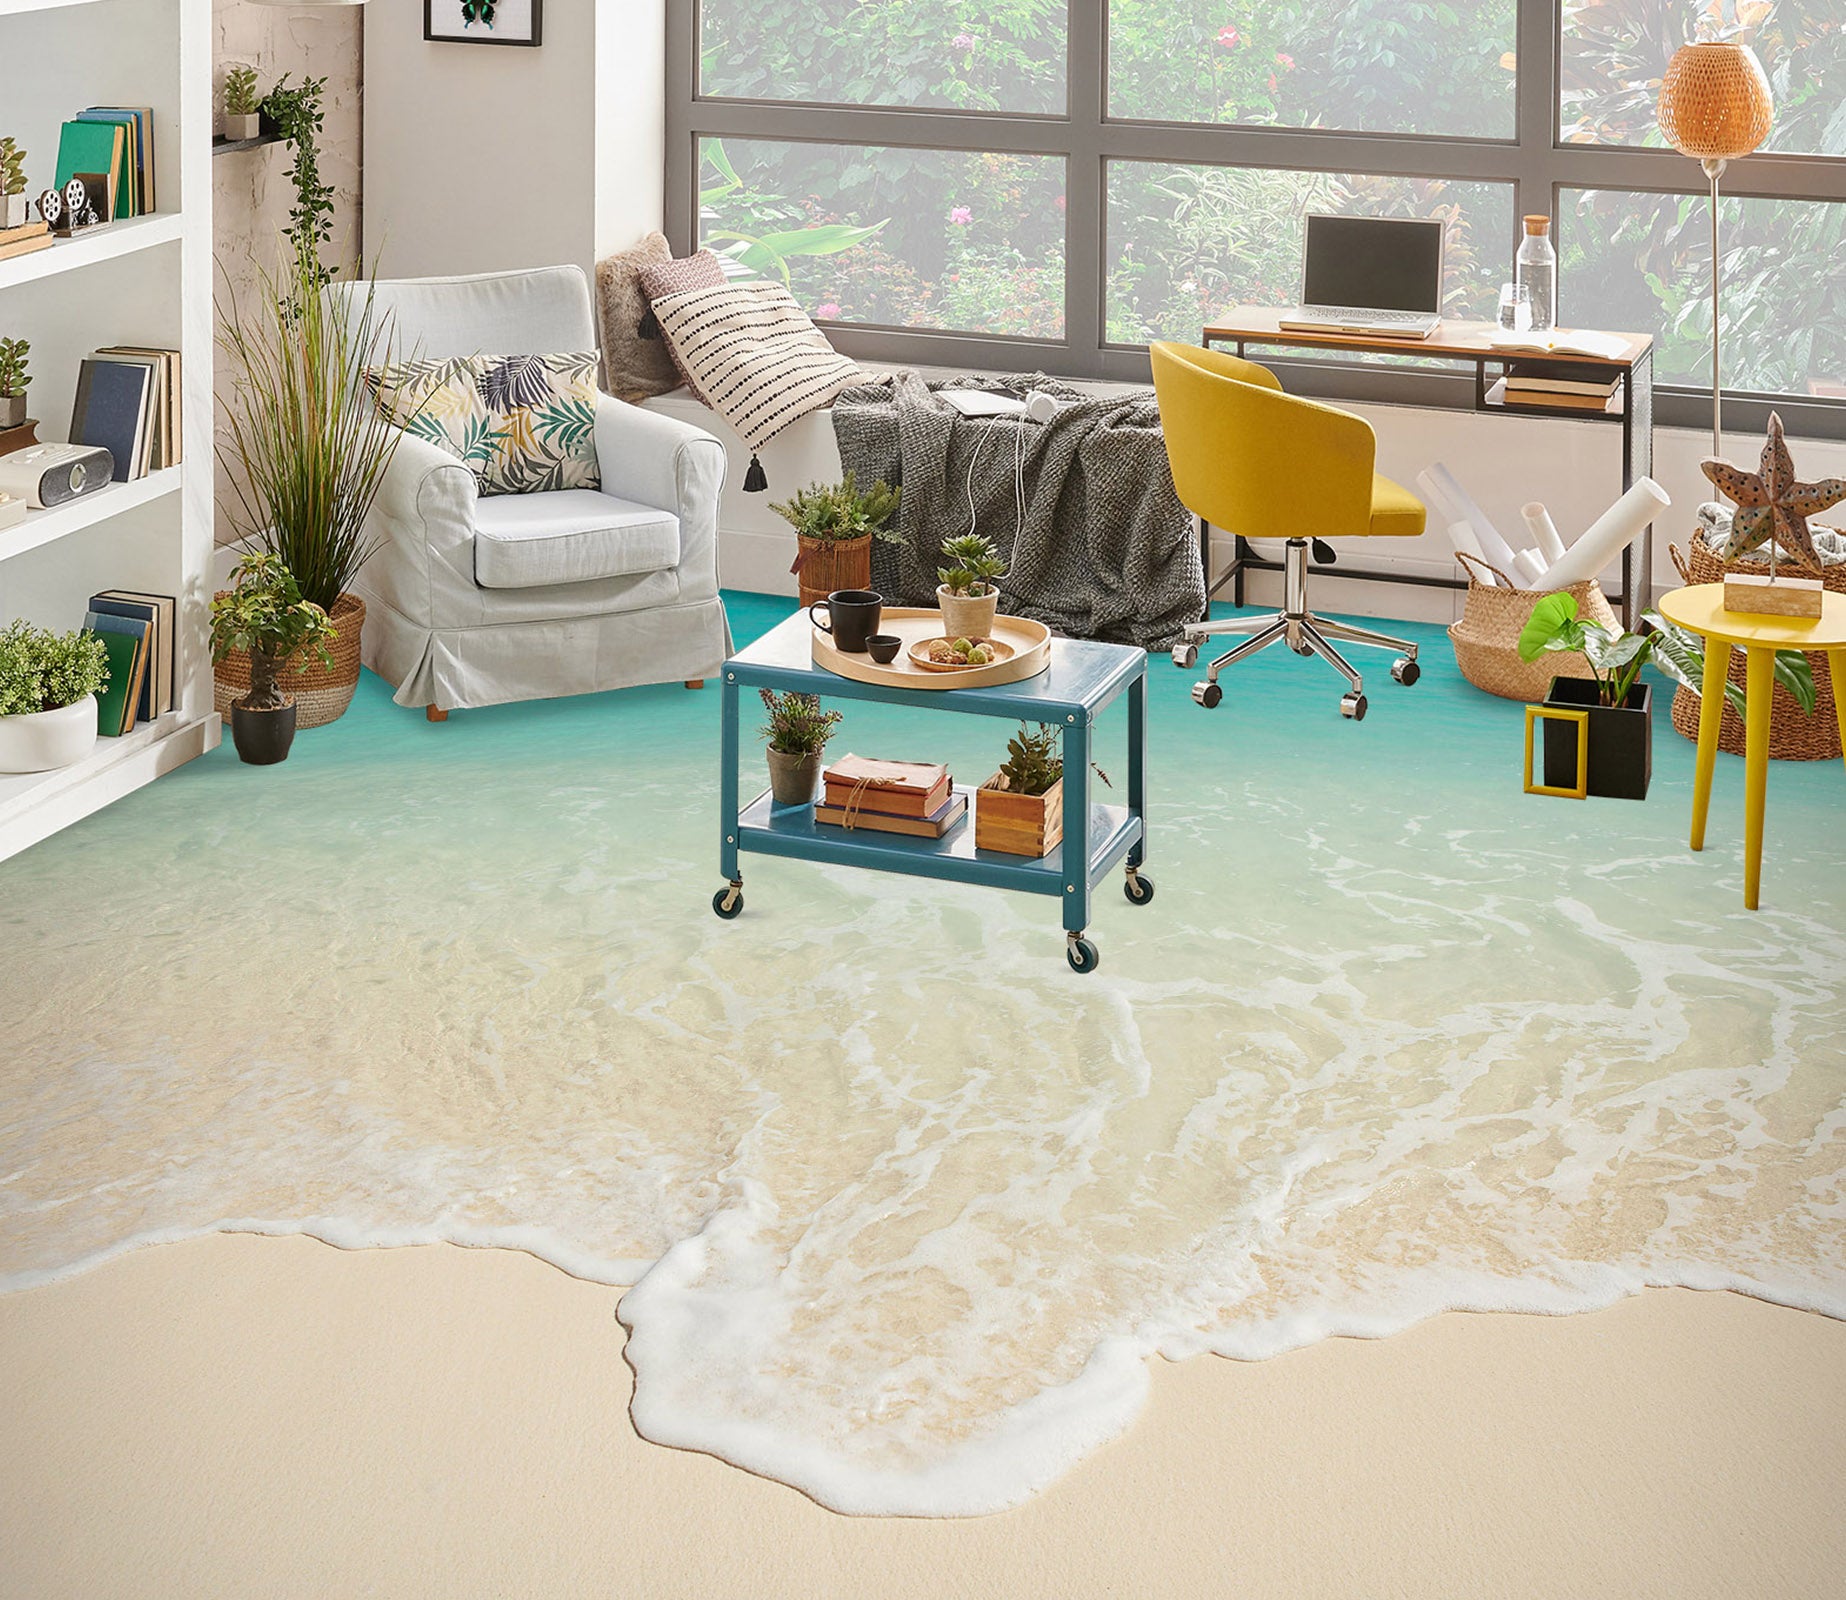 3D Touch The Sea 1518 Floor Mural  Wallpaper Murals Self-Adhesive Removable Print Epoxy